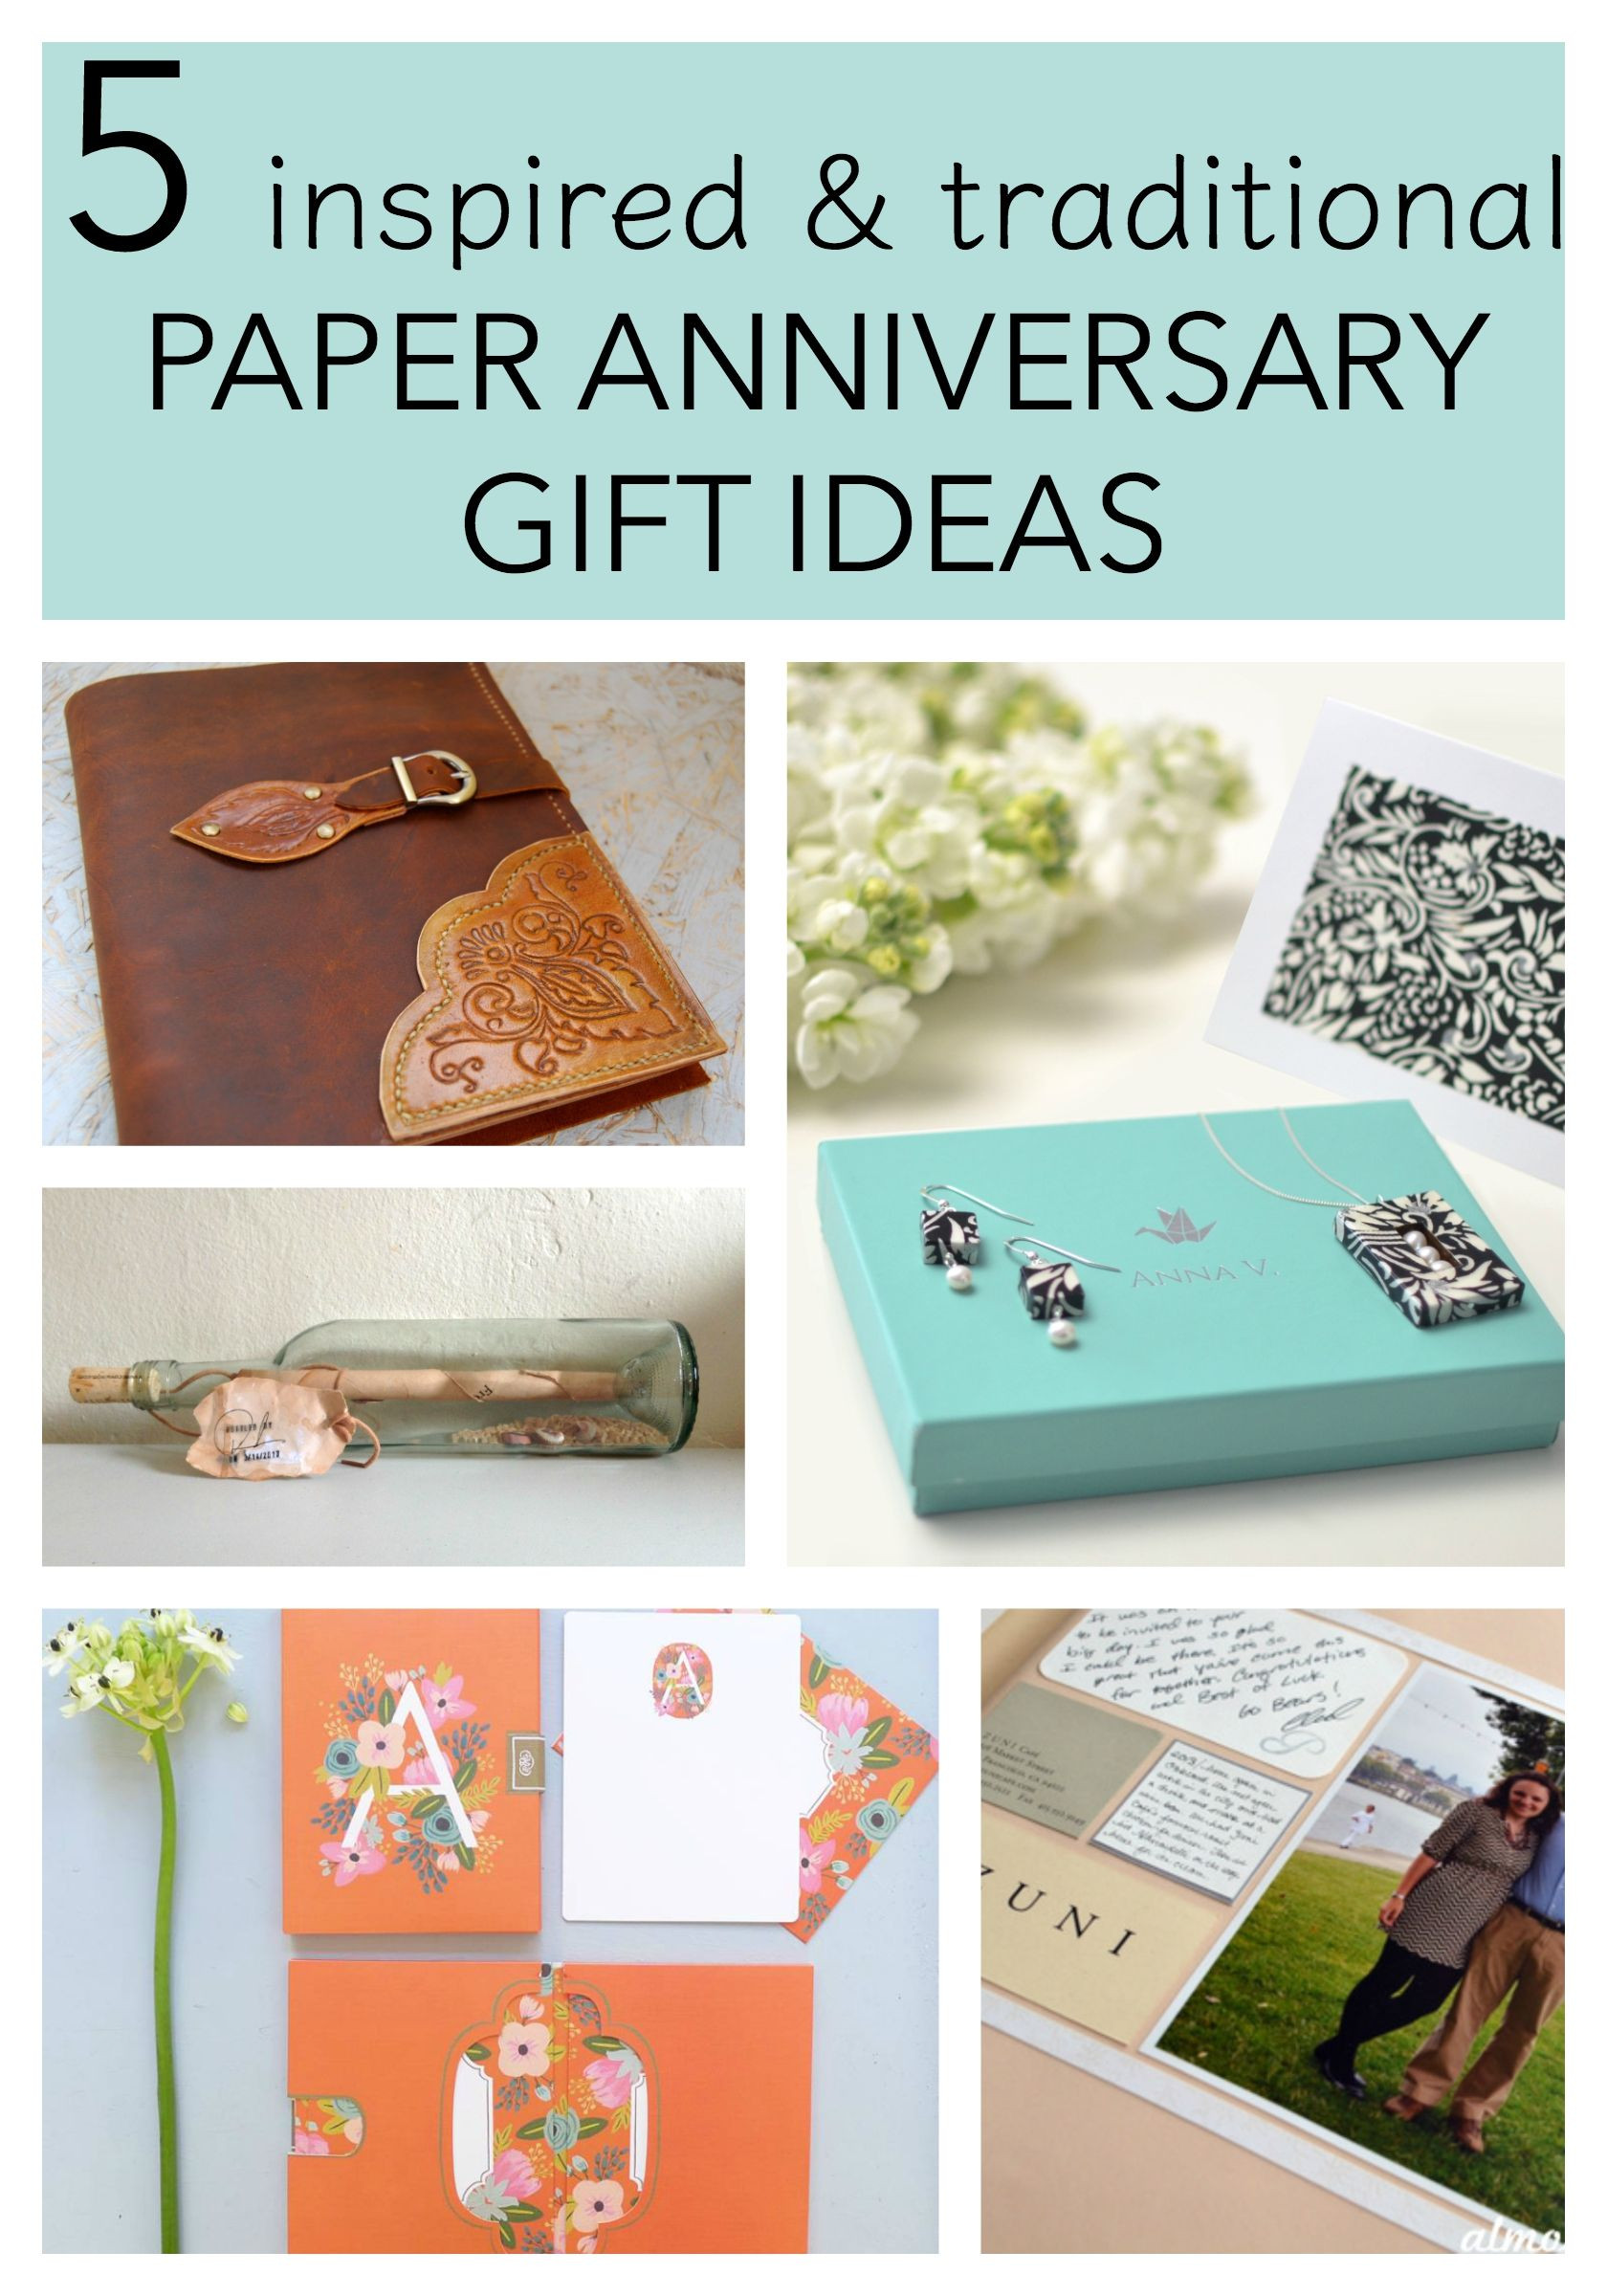 First Anniversary Gift Ideas Paper
 5 Traditional Paper Anniversary Gift Ideas for Her